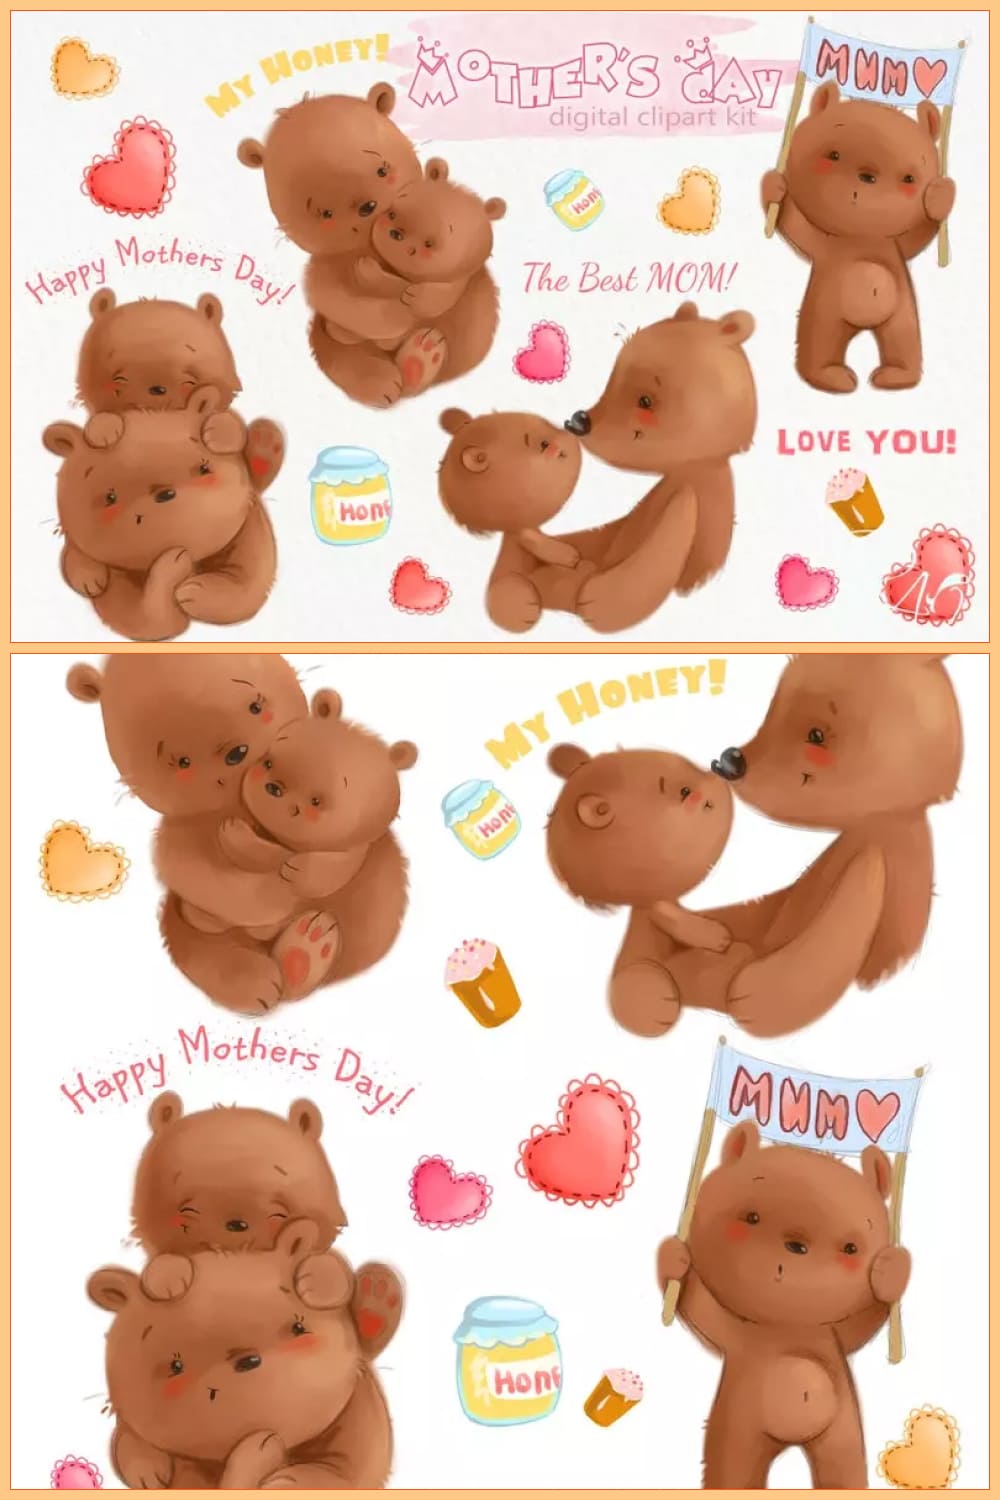 Big mom teddy bear and teddy bear on a white background with hearts.